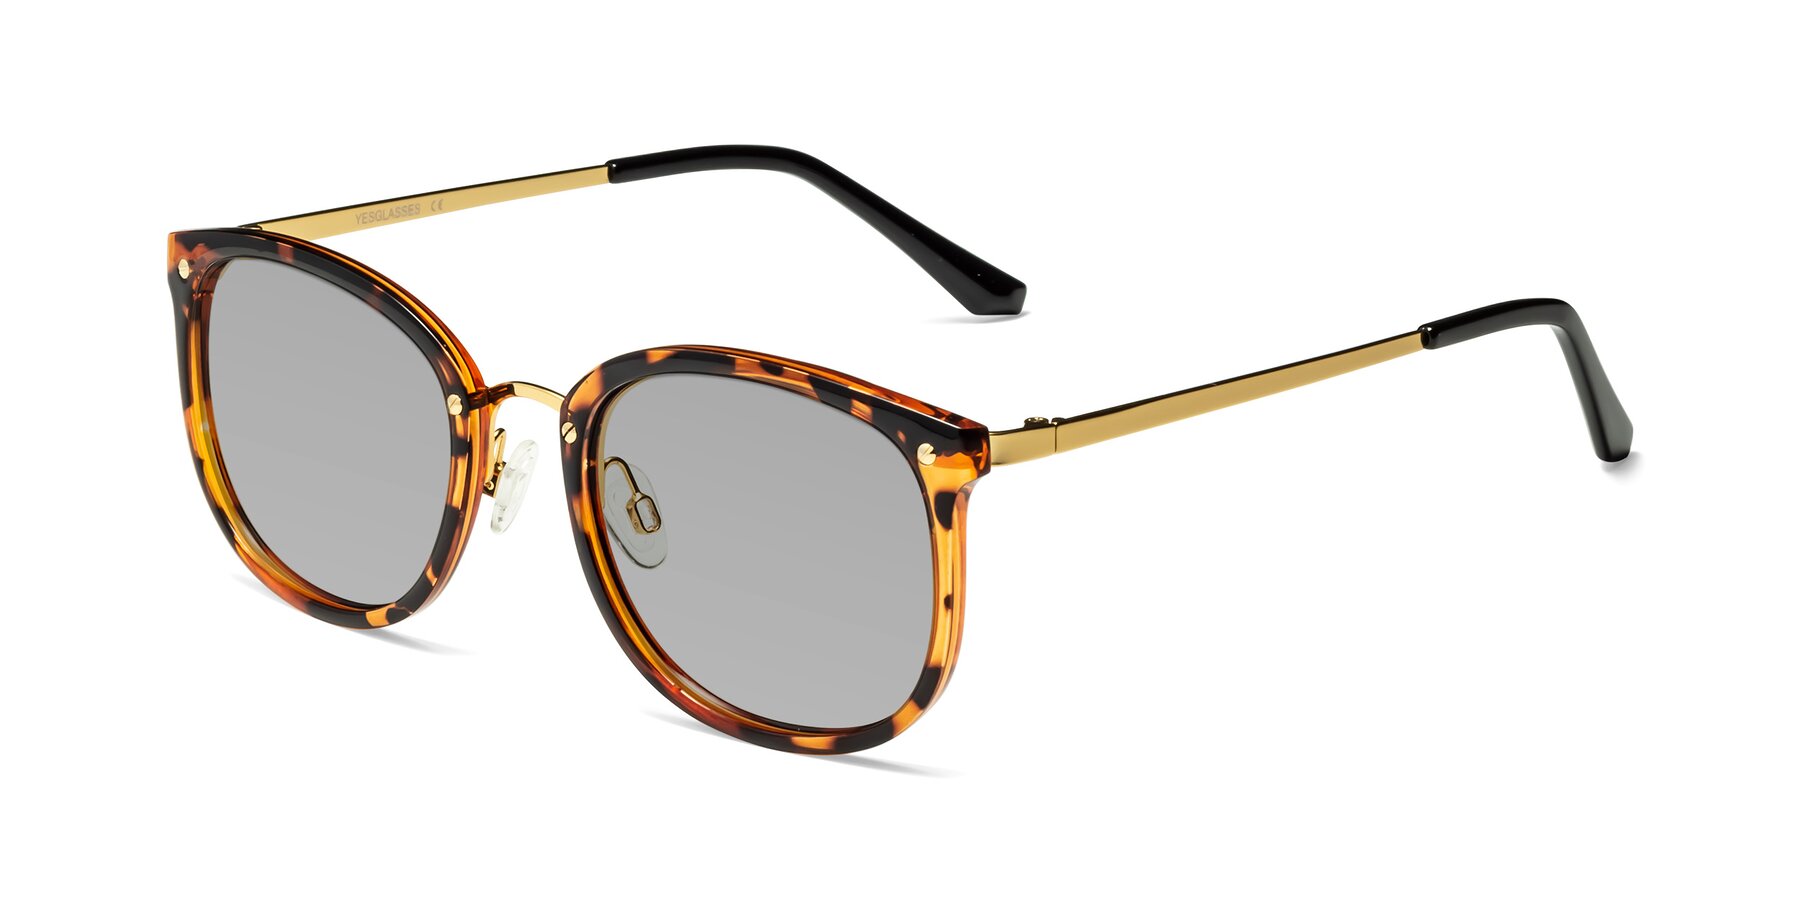 Angle of Timeless in Tortoise-Golden with Light Gray Tinted Lenses